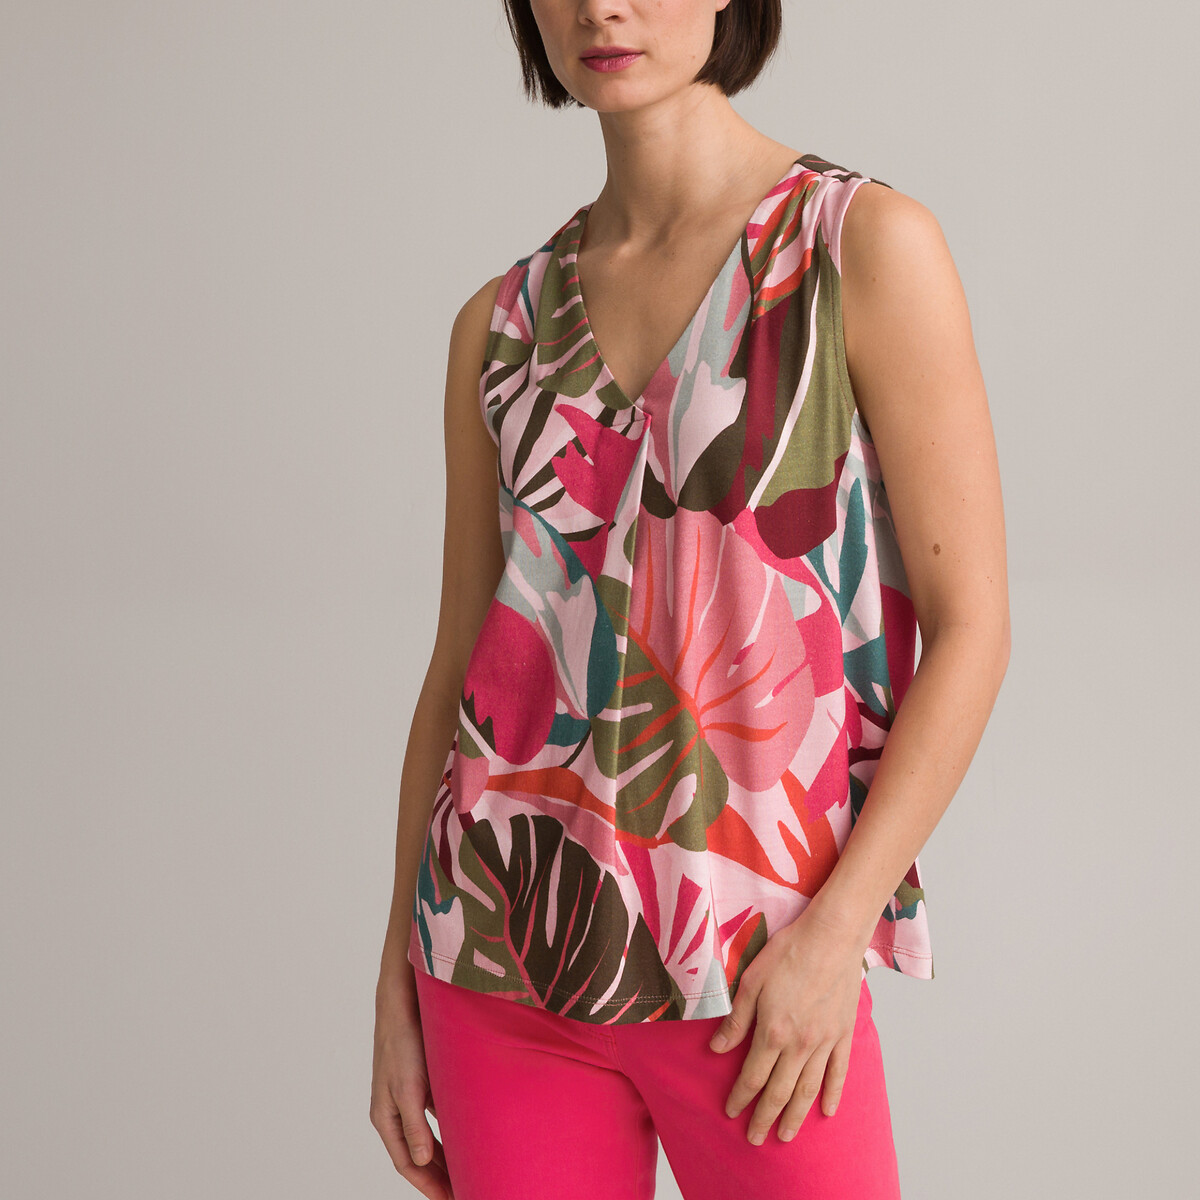 Image of Printed Sleeveless Vest Top in Cotton Mix with V-Neck